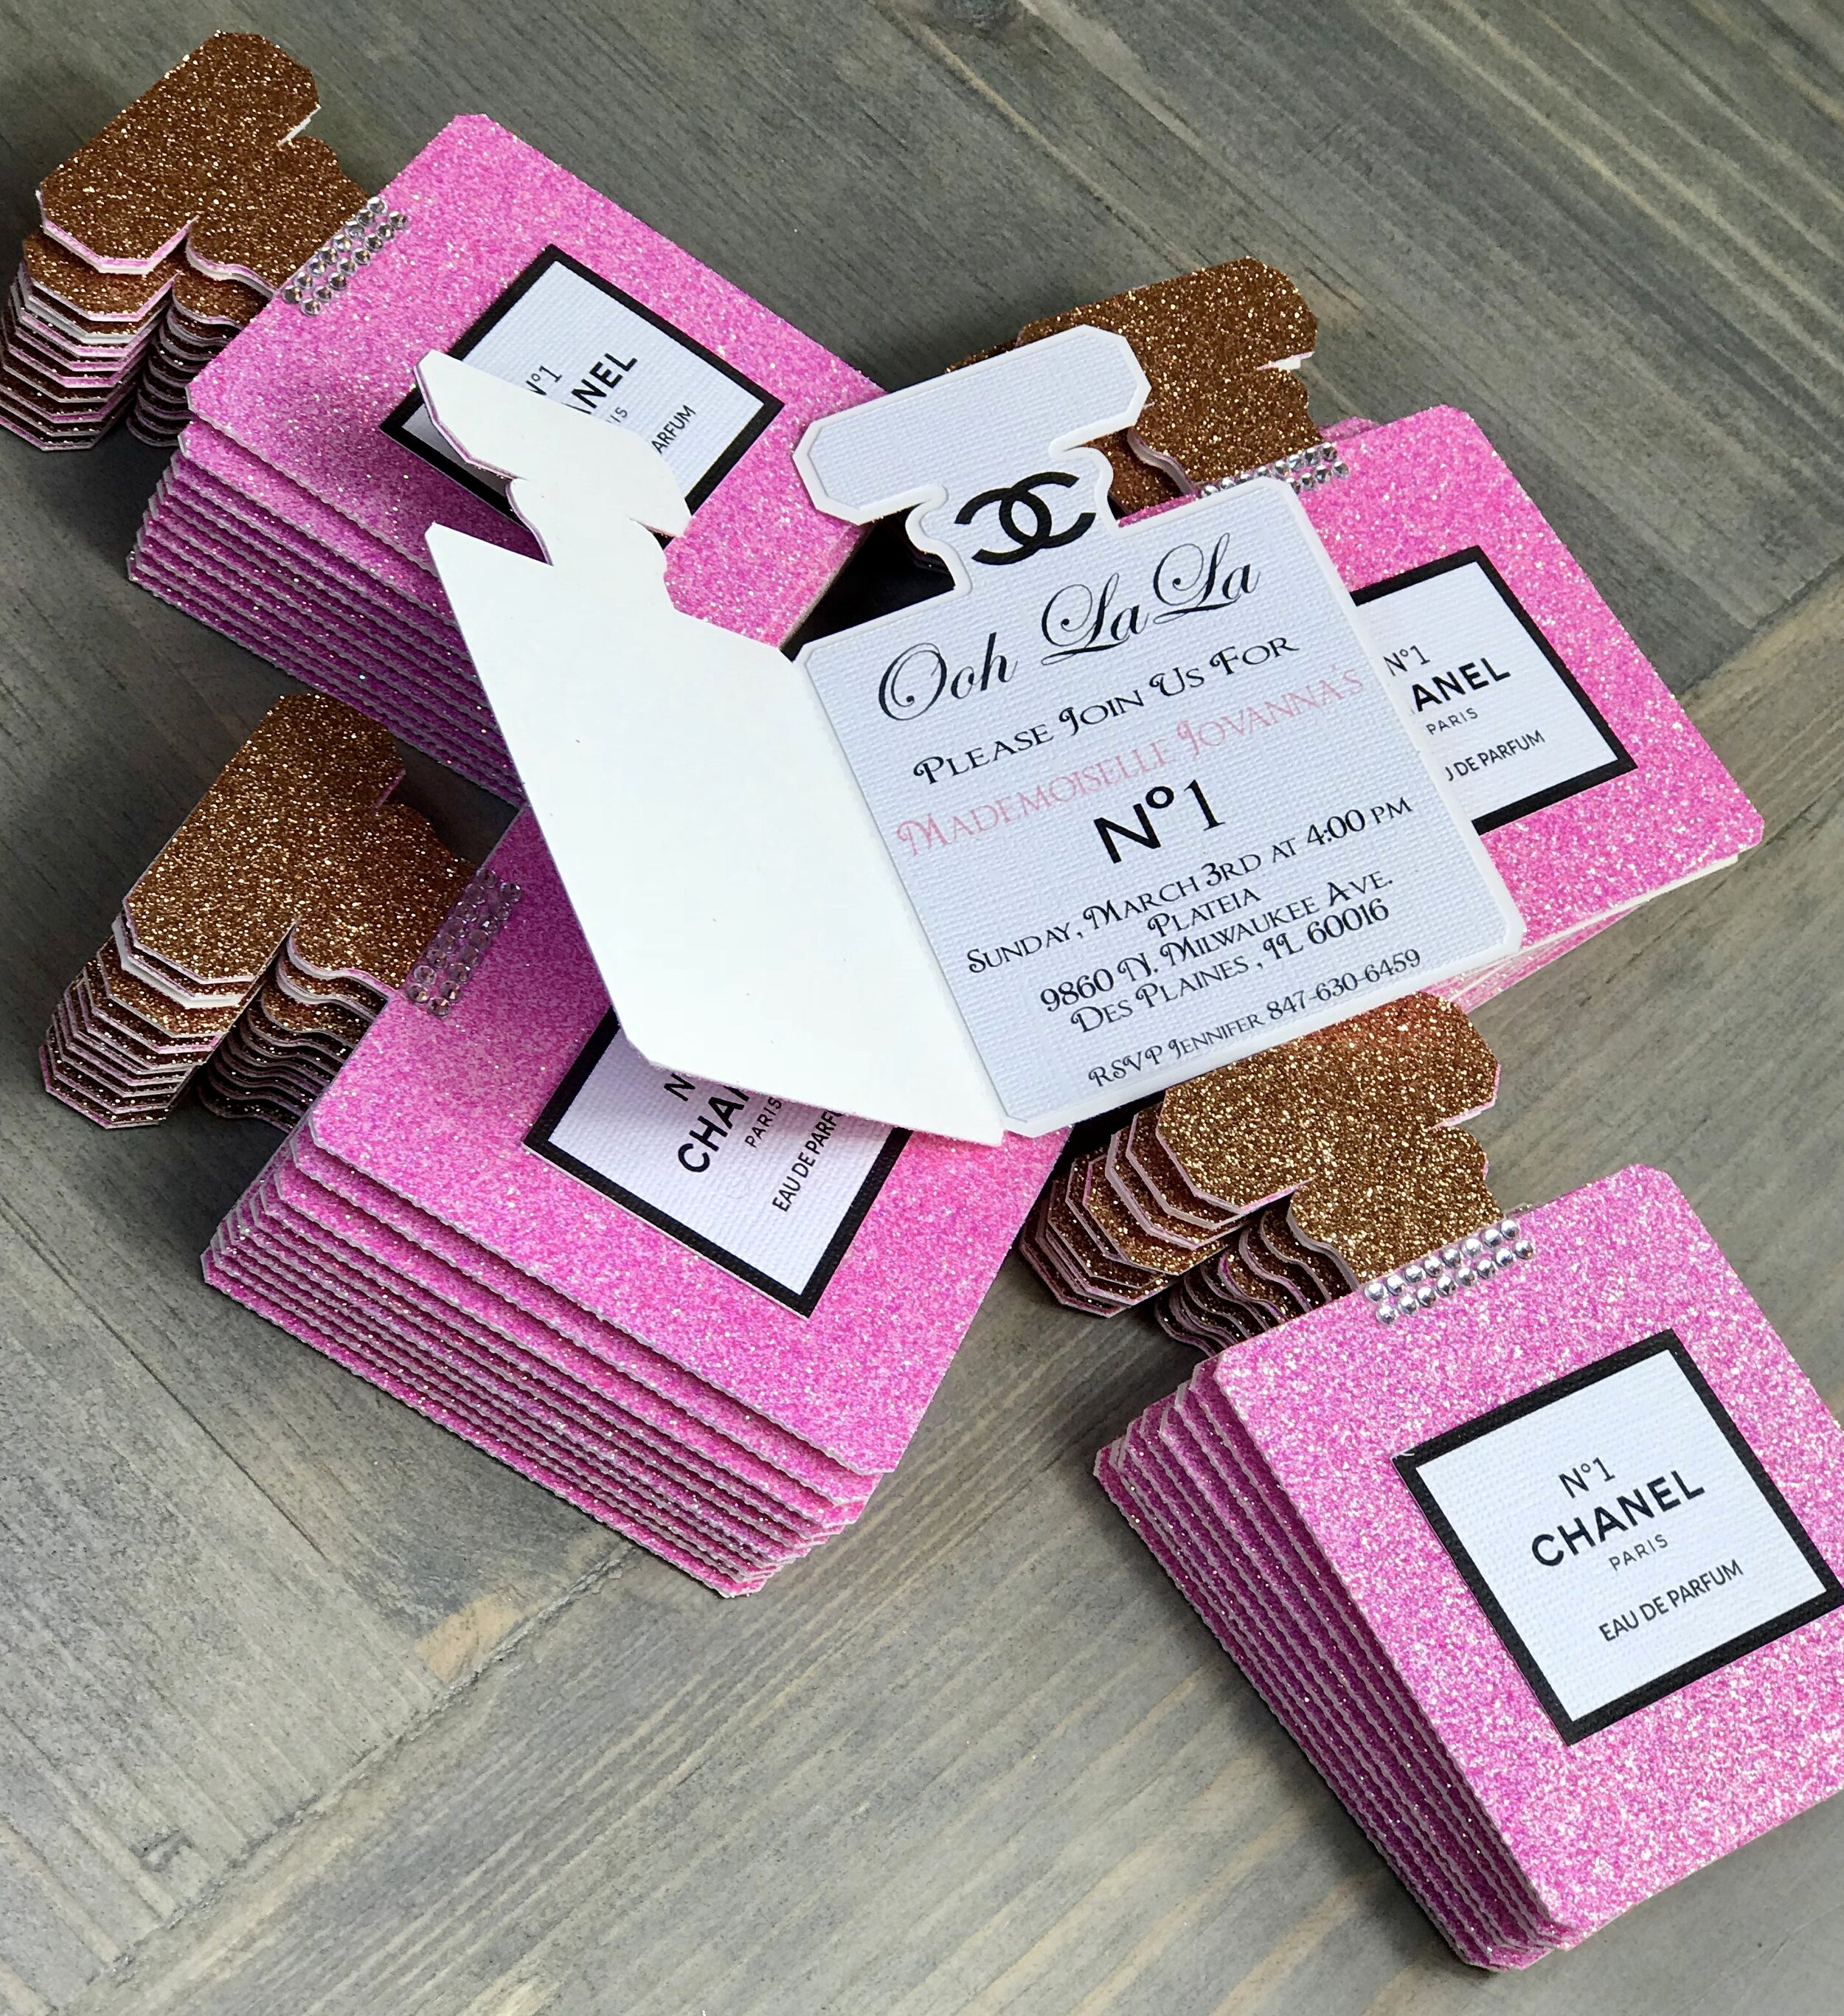 Chanel Perfume Shaped Invitations — Luxury Party Items